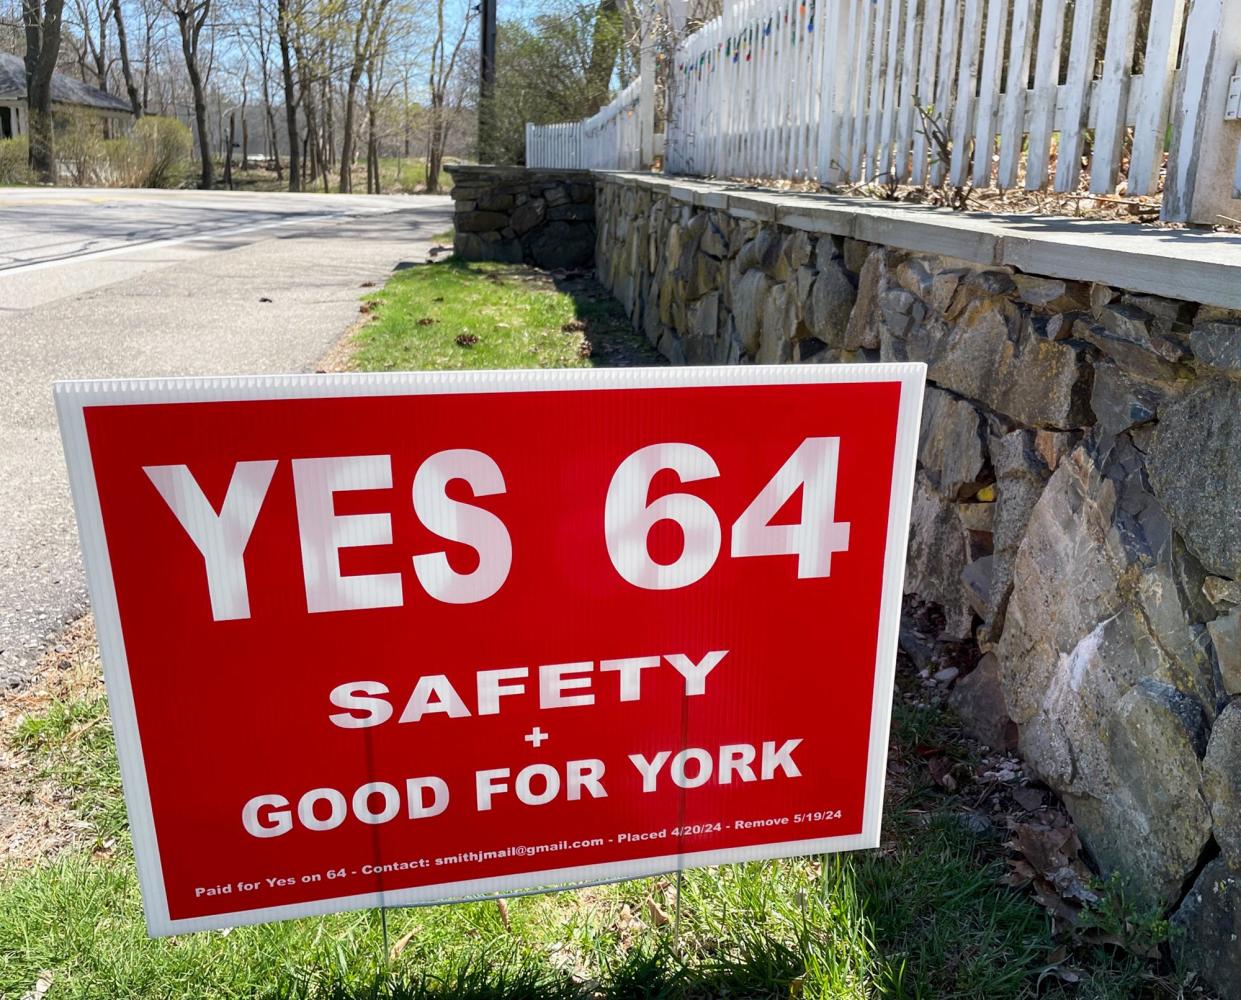 Article 64 in York looks to establish a short-term rental ordinance and there are many signs throughout town urging to vote yes and to vote no.